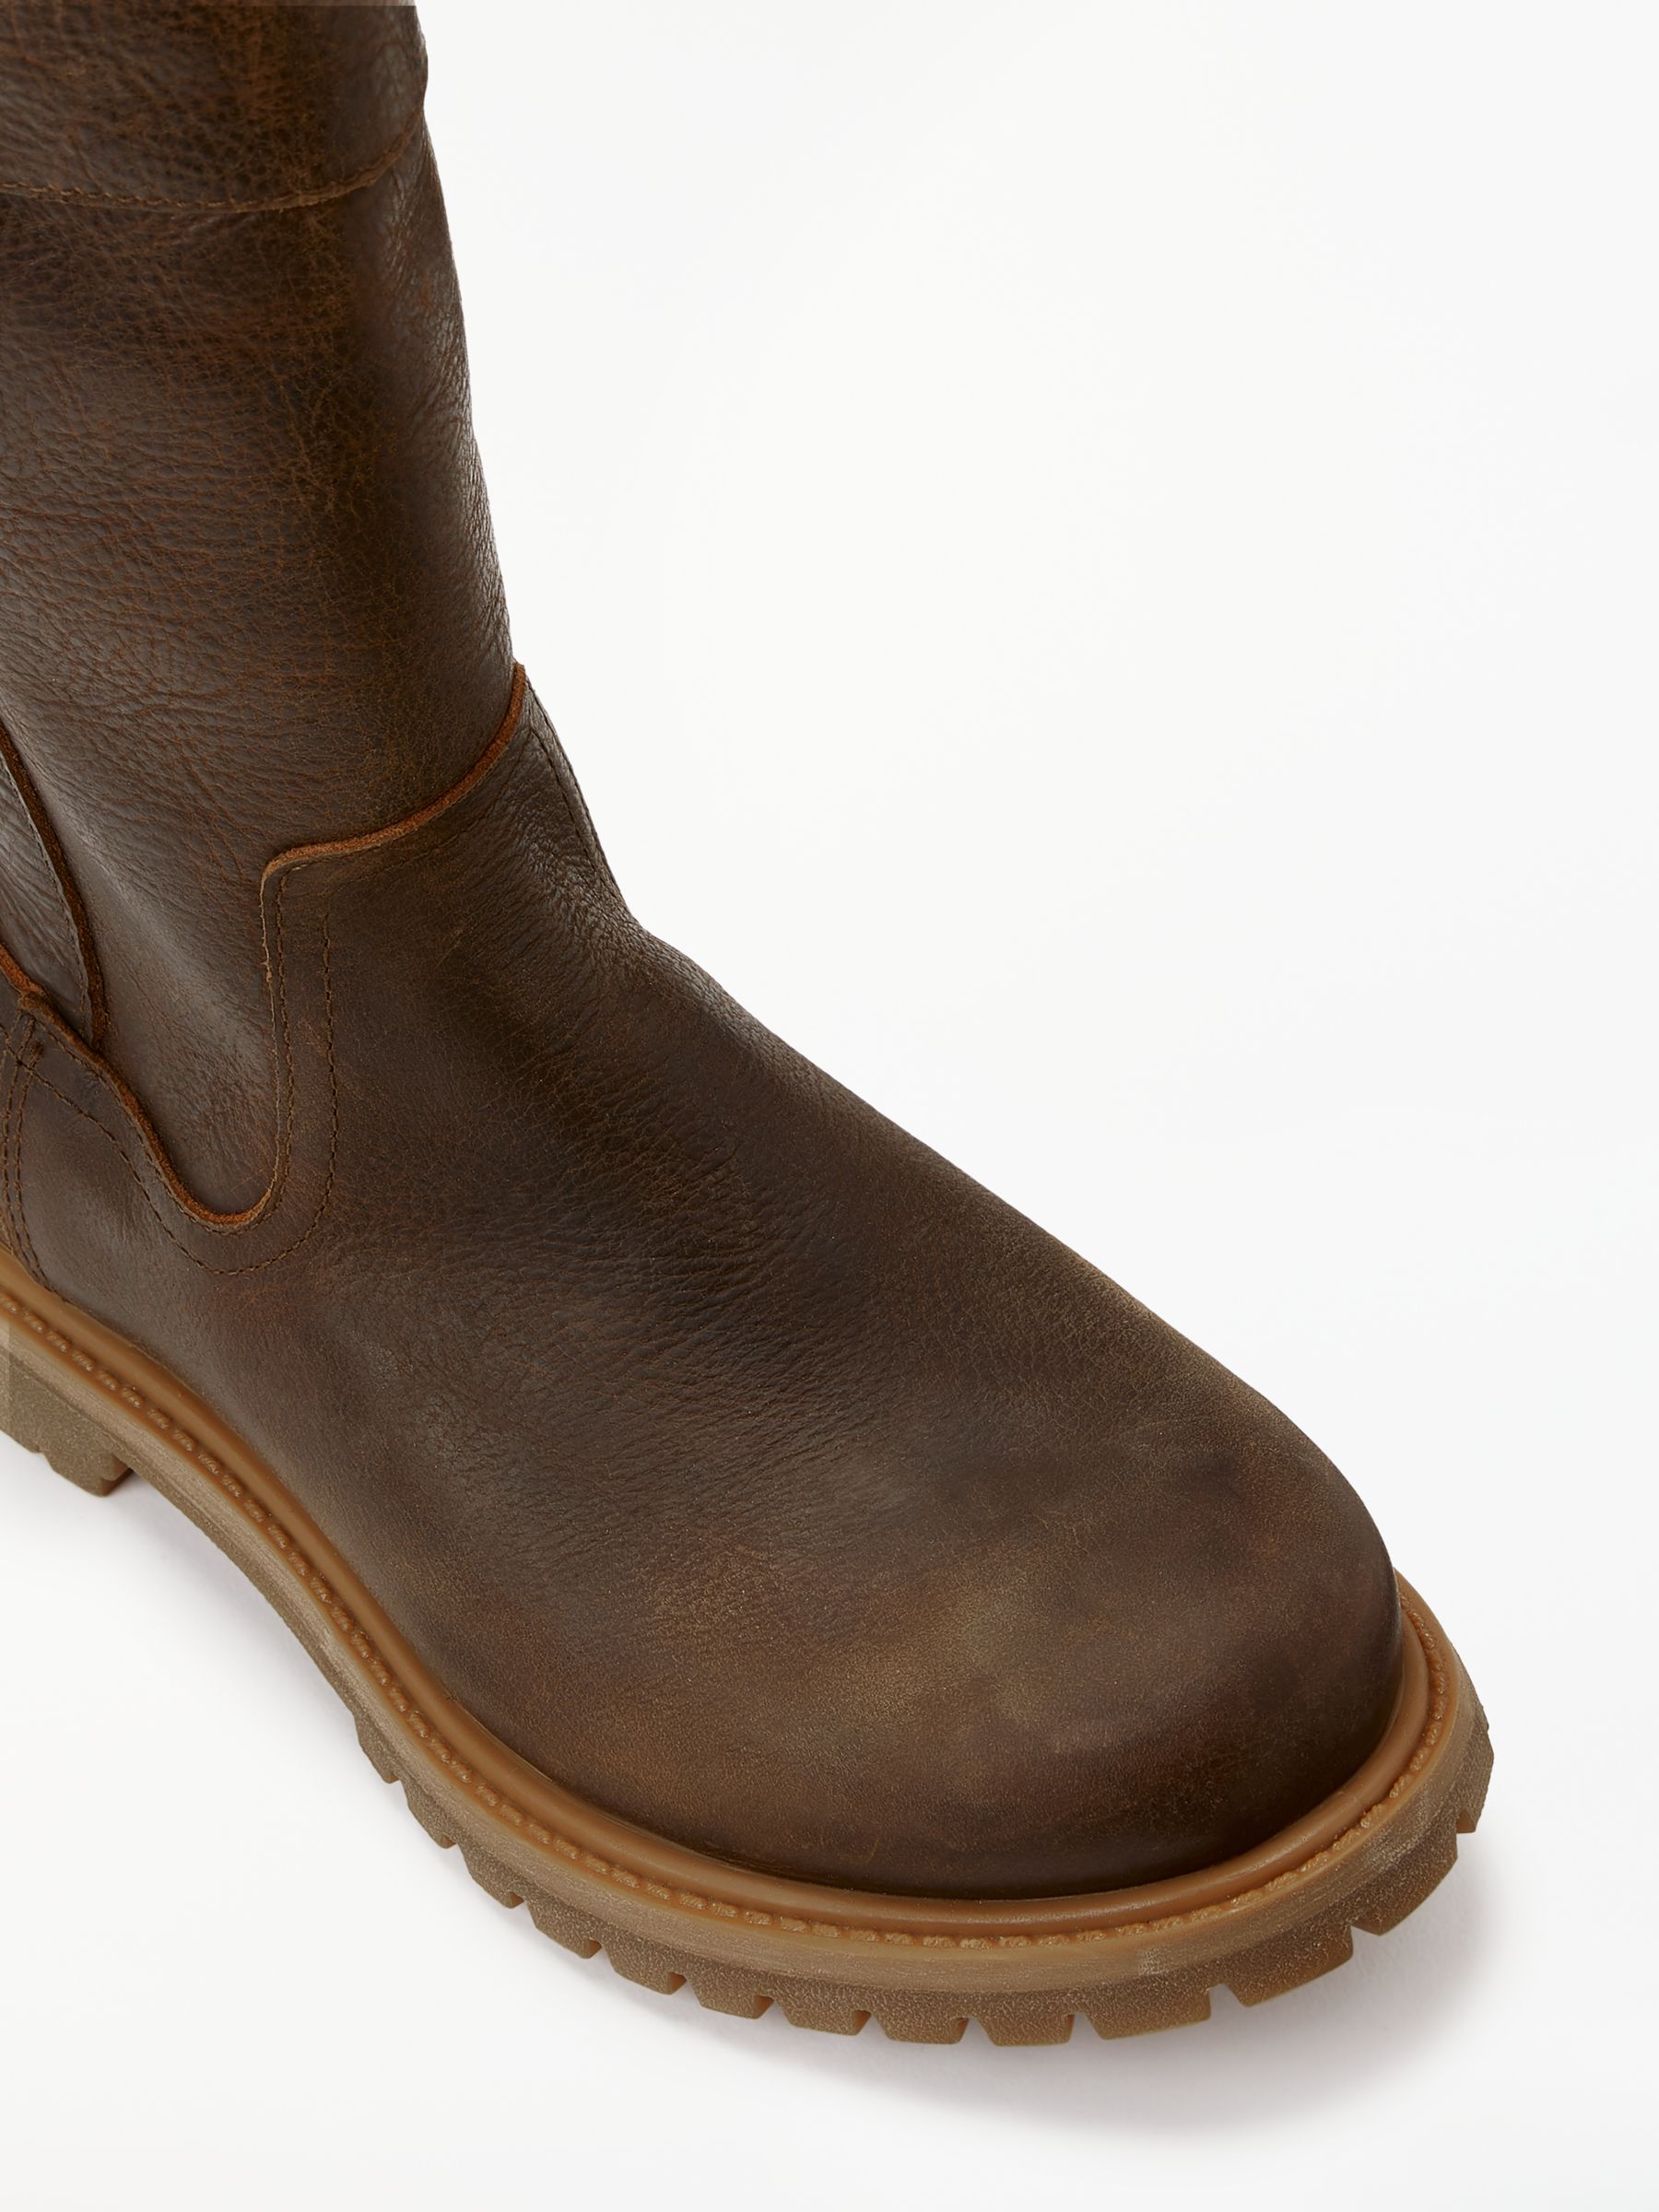 Waterproof Calf Boots, Brown Leather 